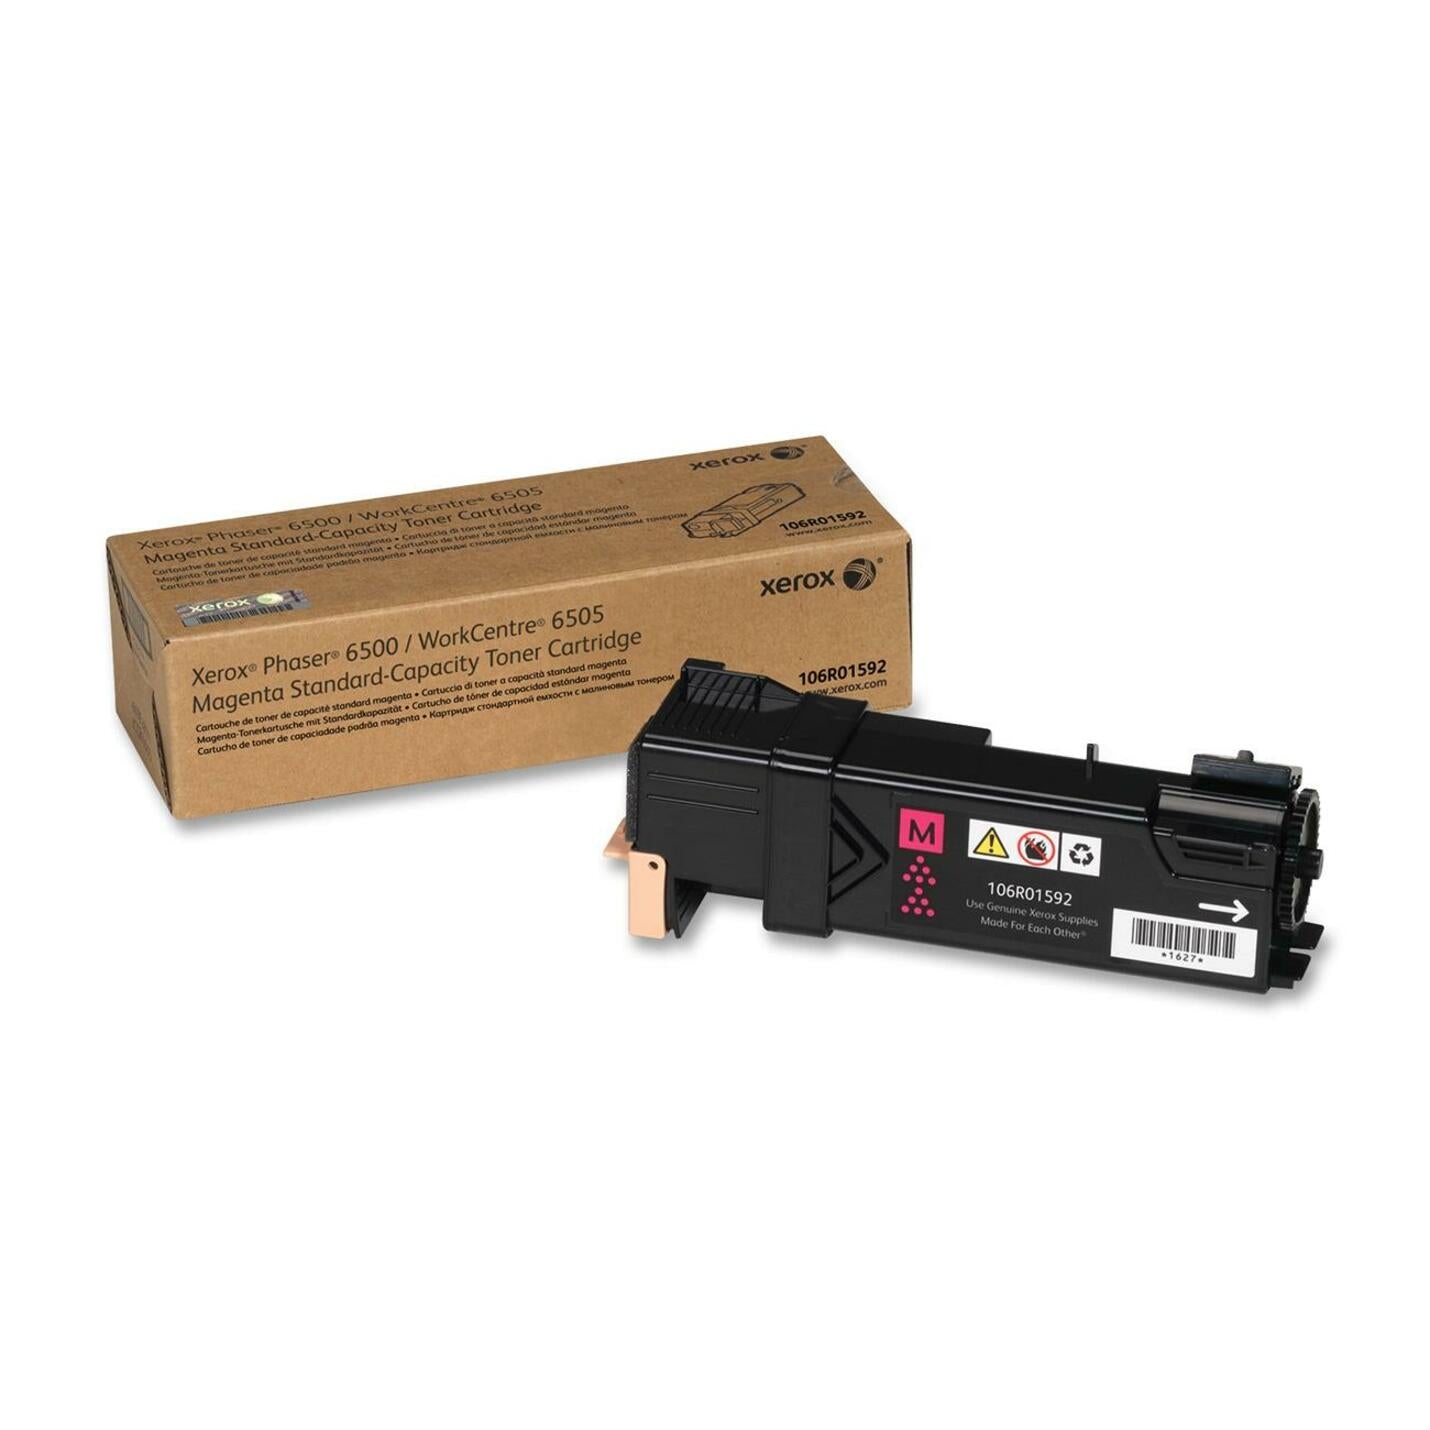 Xerox Phaser/Toner Cartridge, Magenta - 1000 Page Yield [Discontinued]